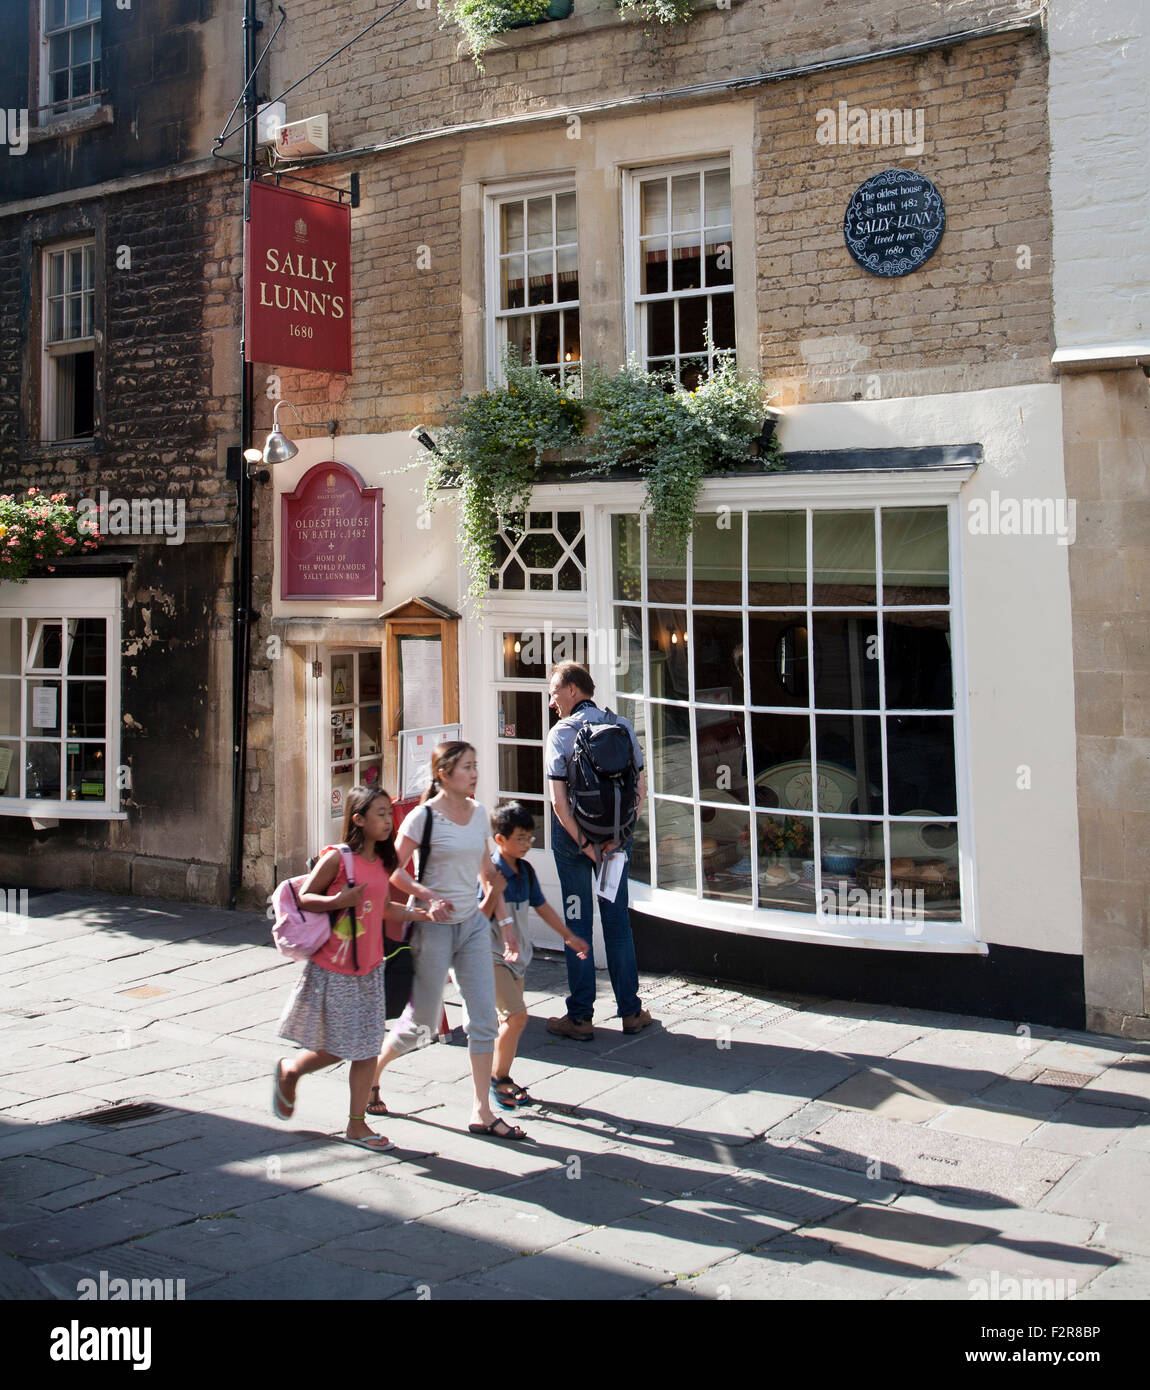 Sally Lunn's tearooms, the oldest house in Bath, Somerset, England, UK Stock Photo